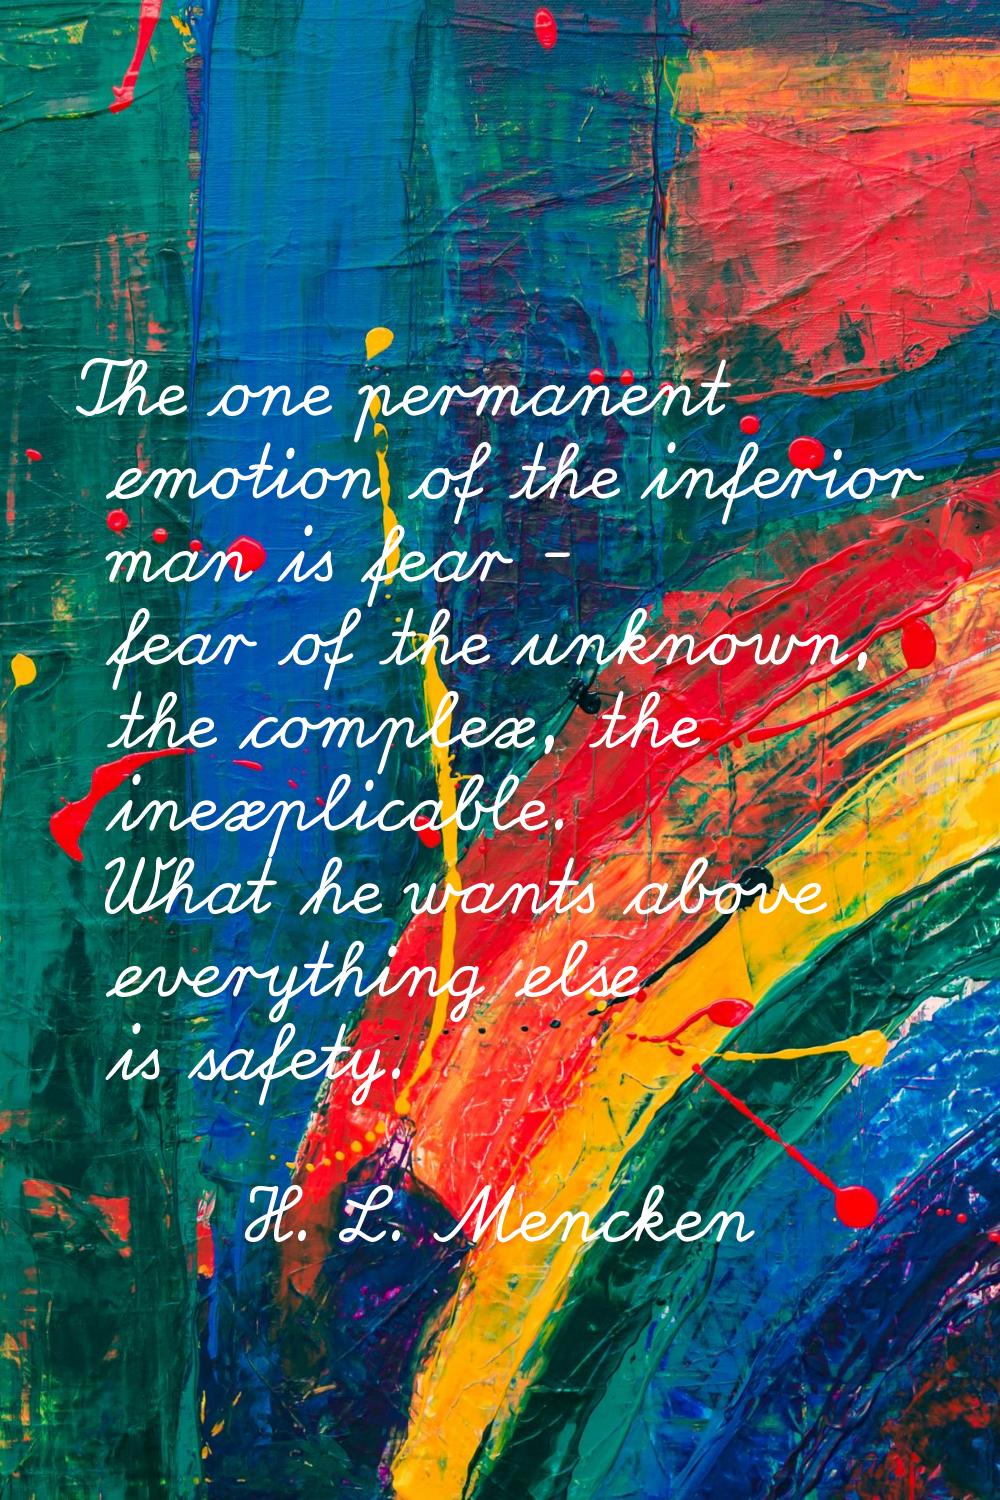 The one permanent emotion of the inferior man is fear - fear of the unknown, the complex, the inexp